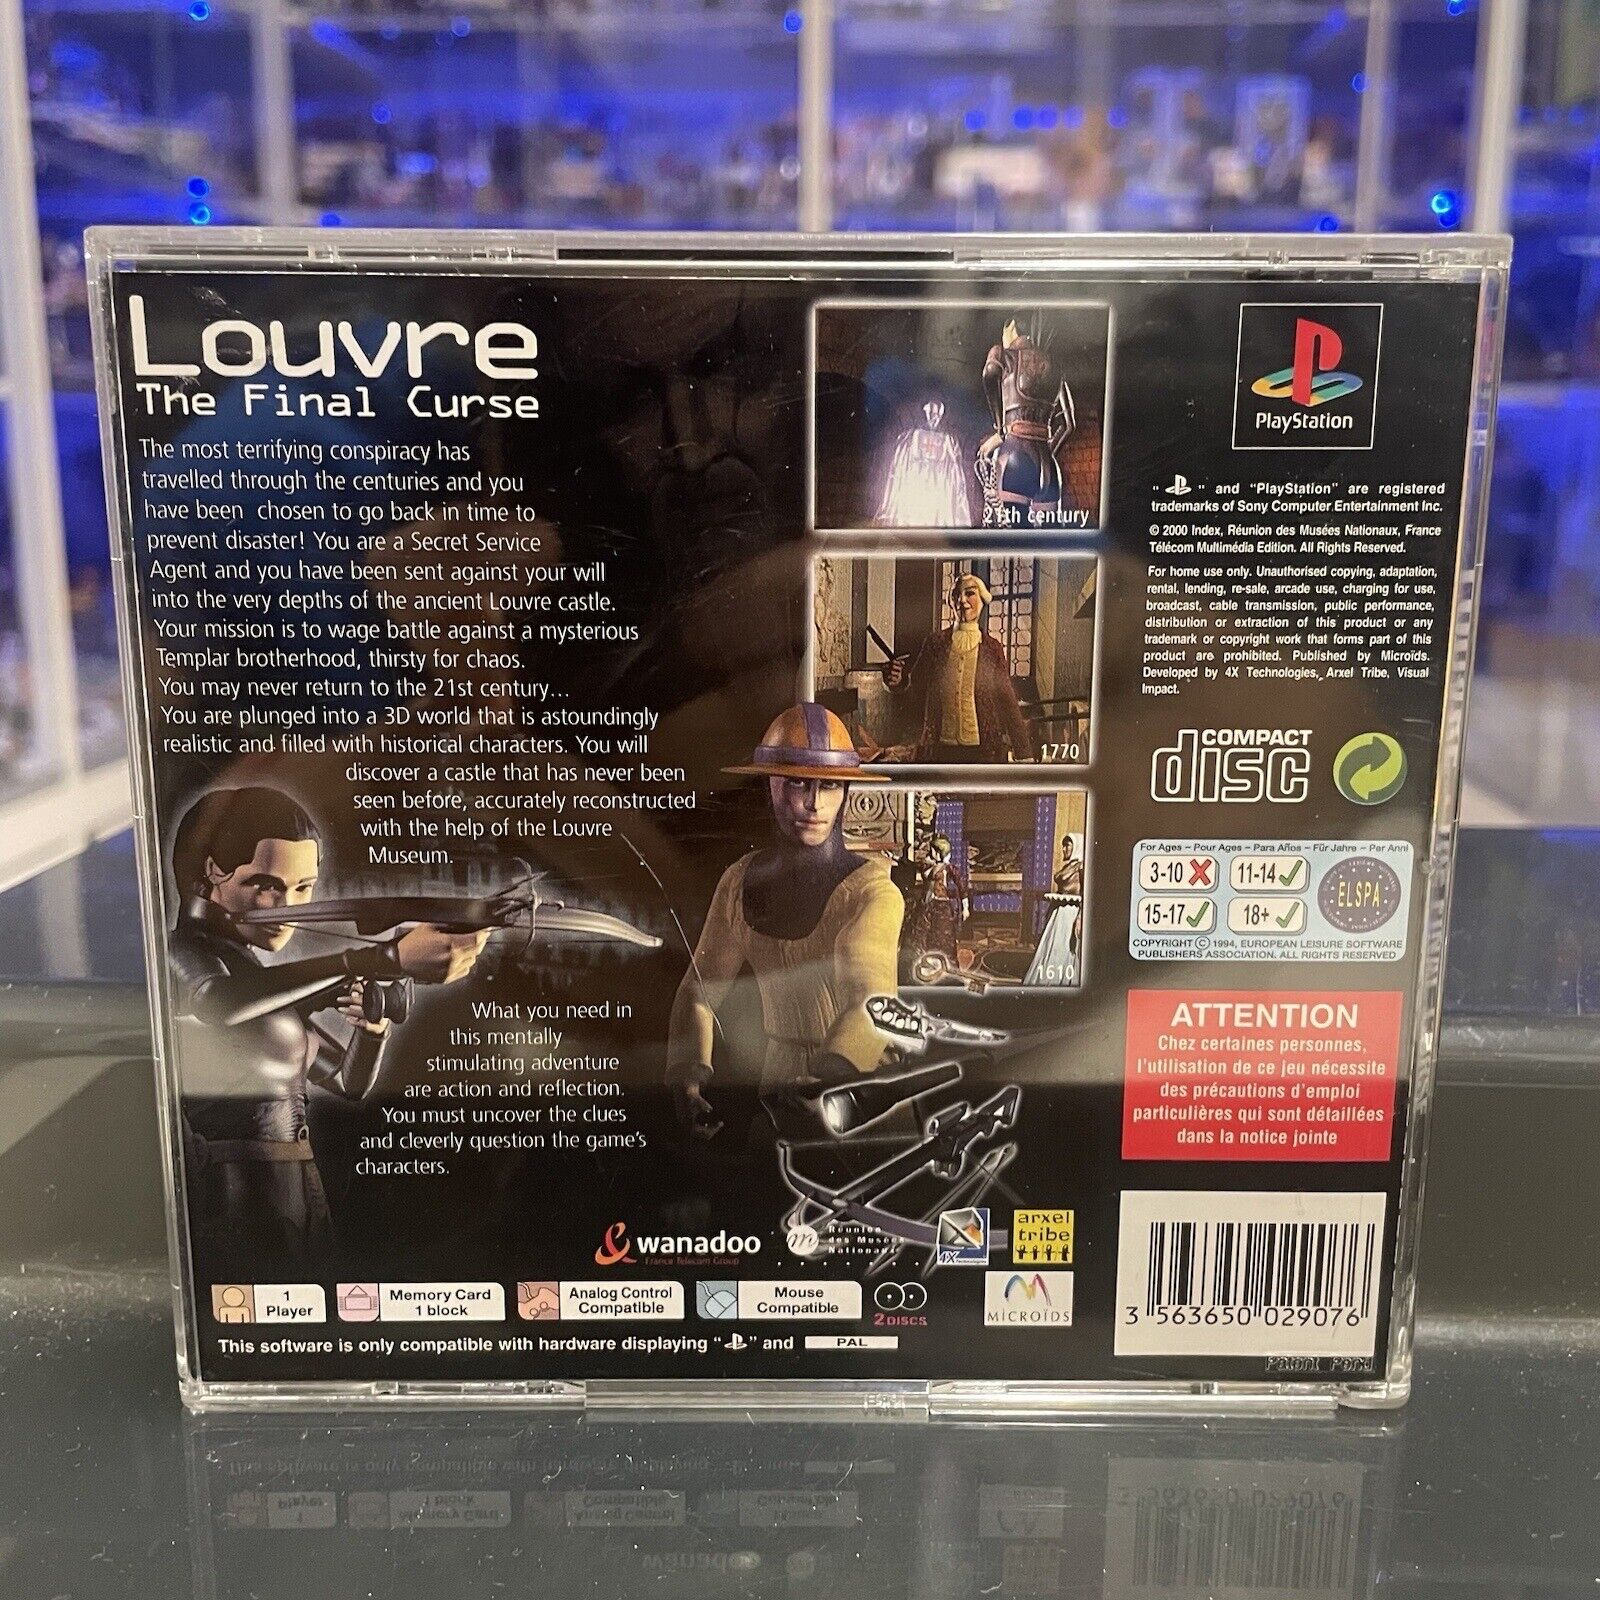 Ps1-Louvre-the-final-curse-Sony-Playstation-Pal-145340928880-2